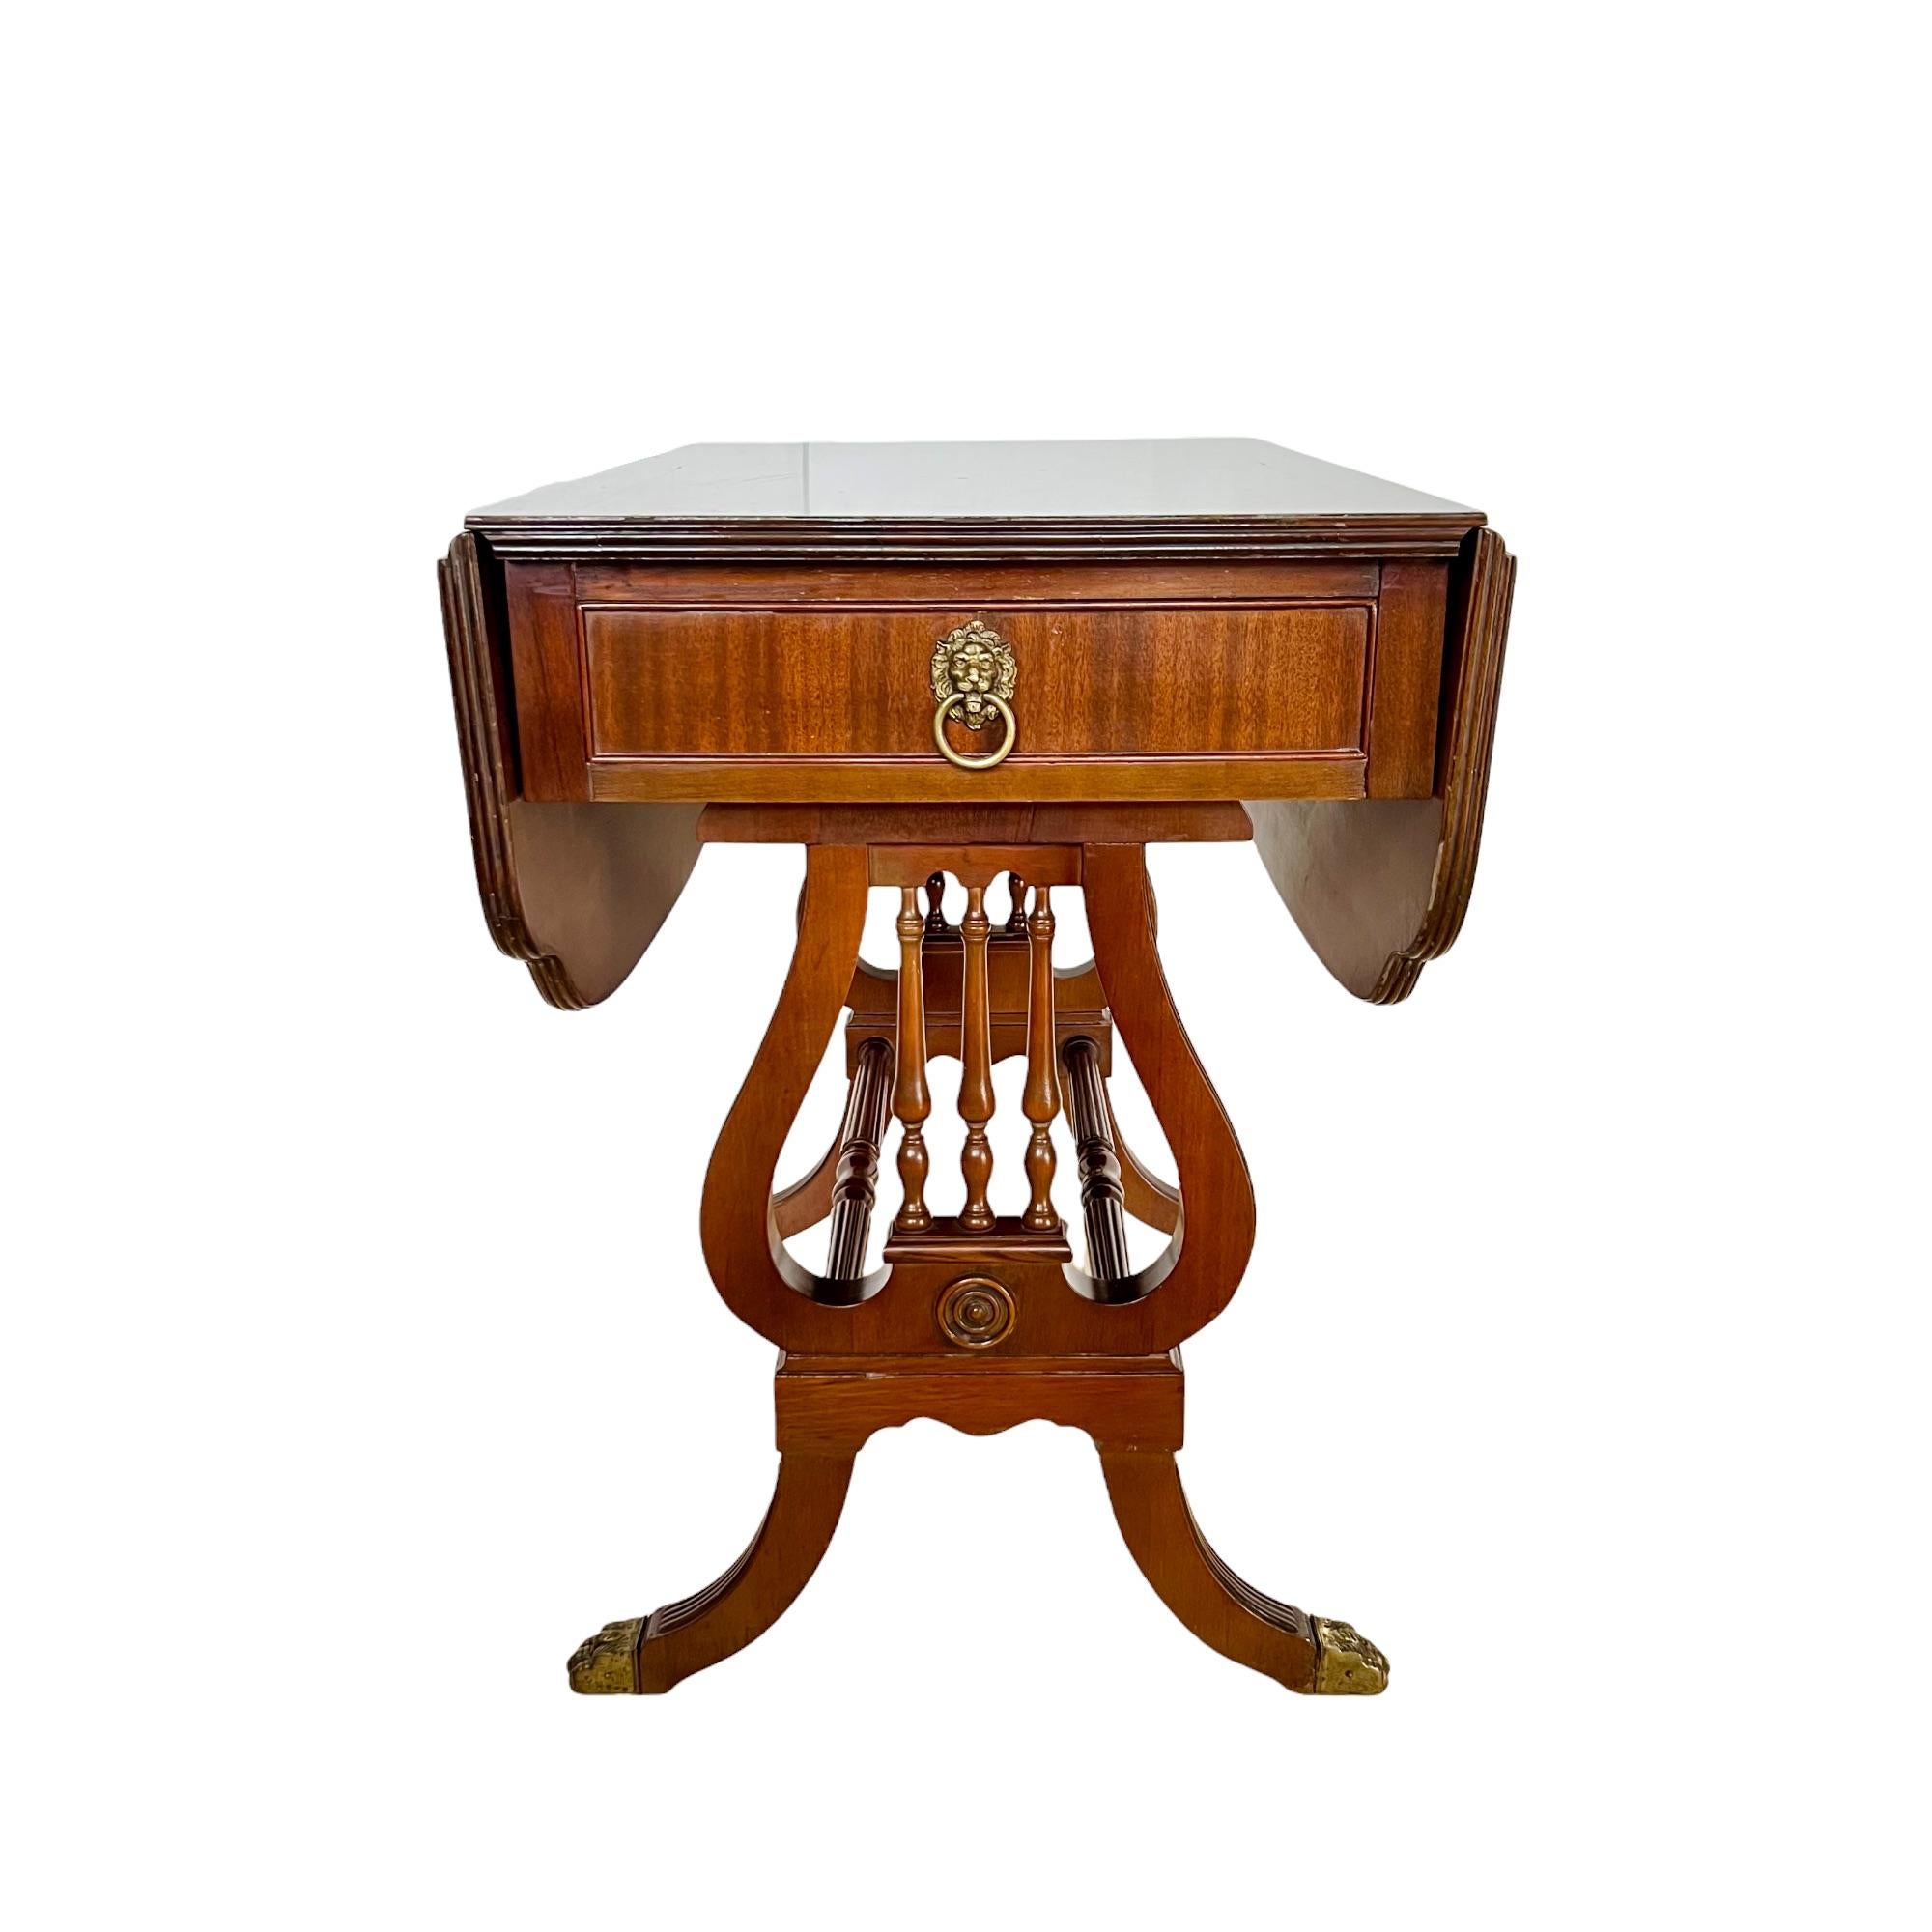 A vintage English Regency style mahogany drop-leaf accent or breakfast table with single drawer. Featuring a rectangular top surface with rounded cut-out corner detail, dual carved and turned stretchers between harp form lyre ends, channeled saber